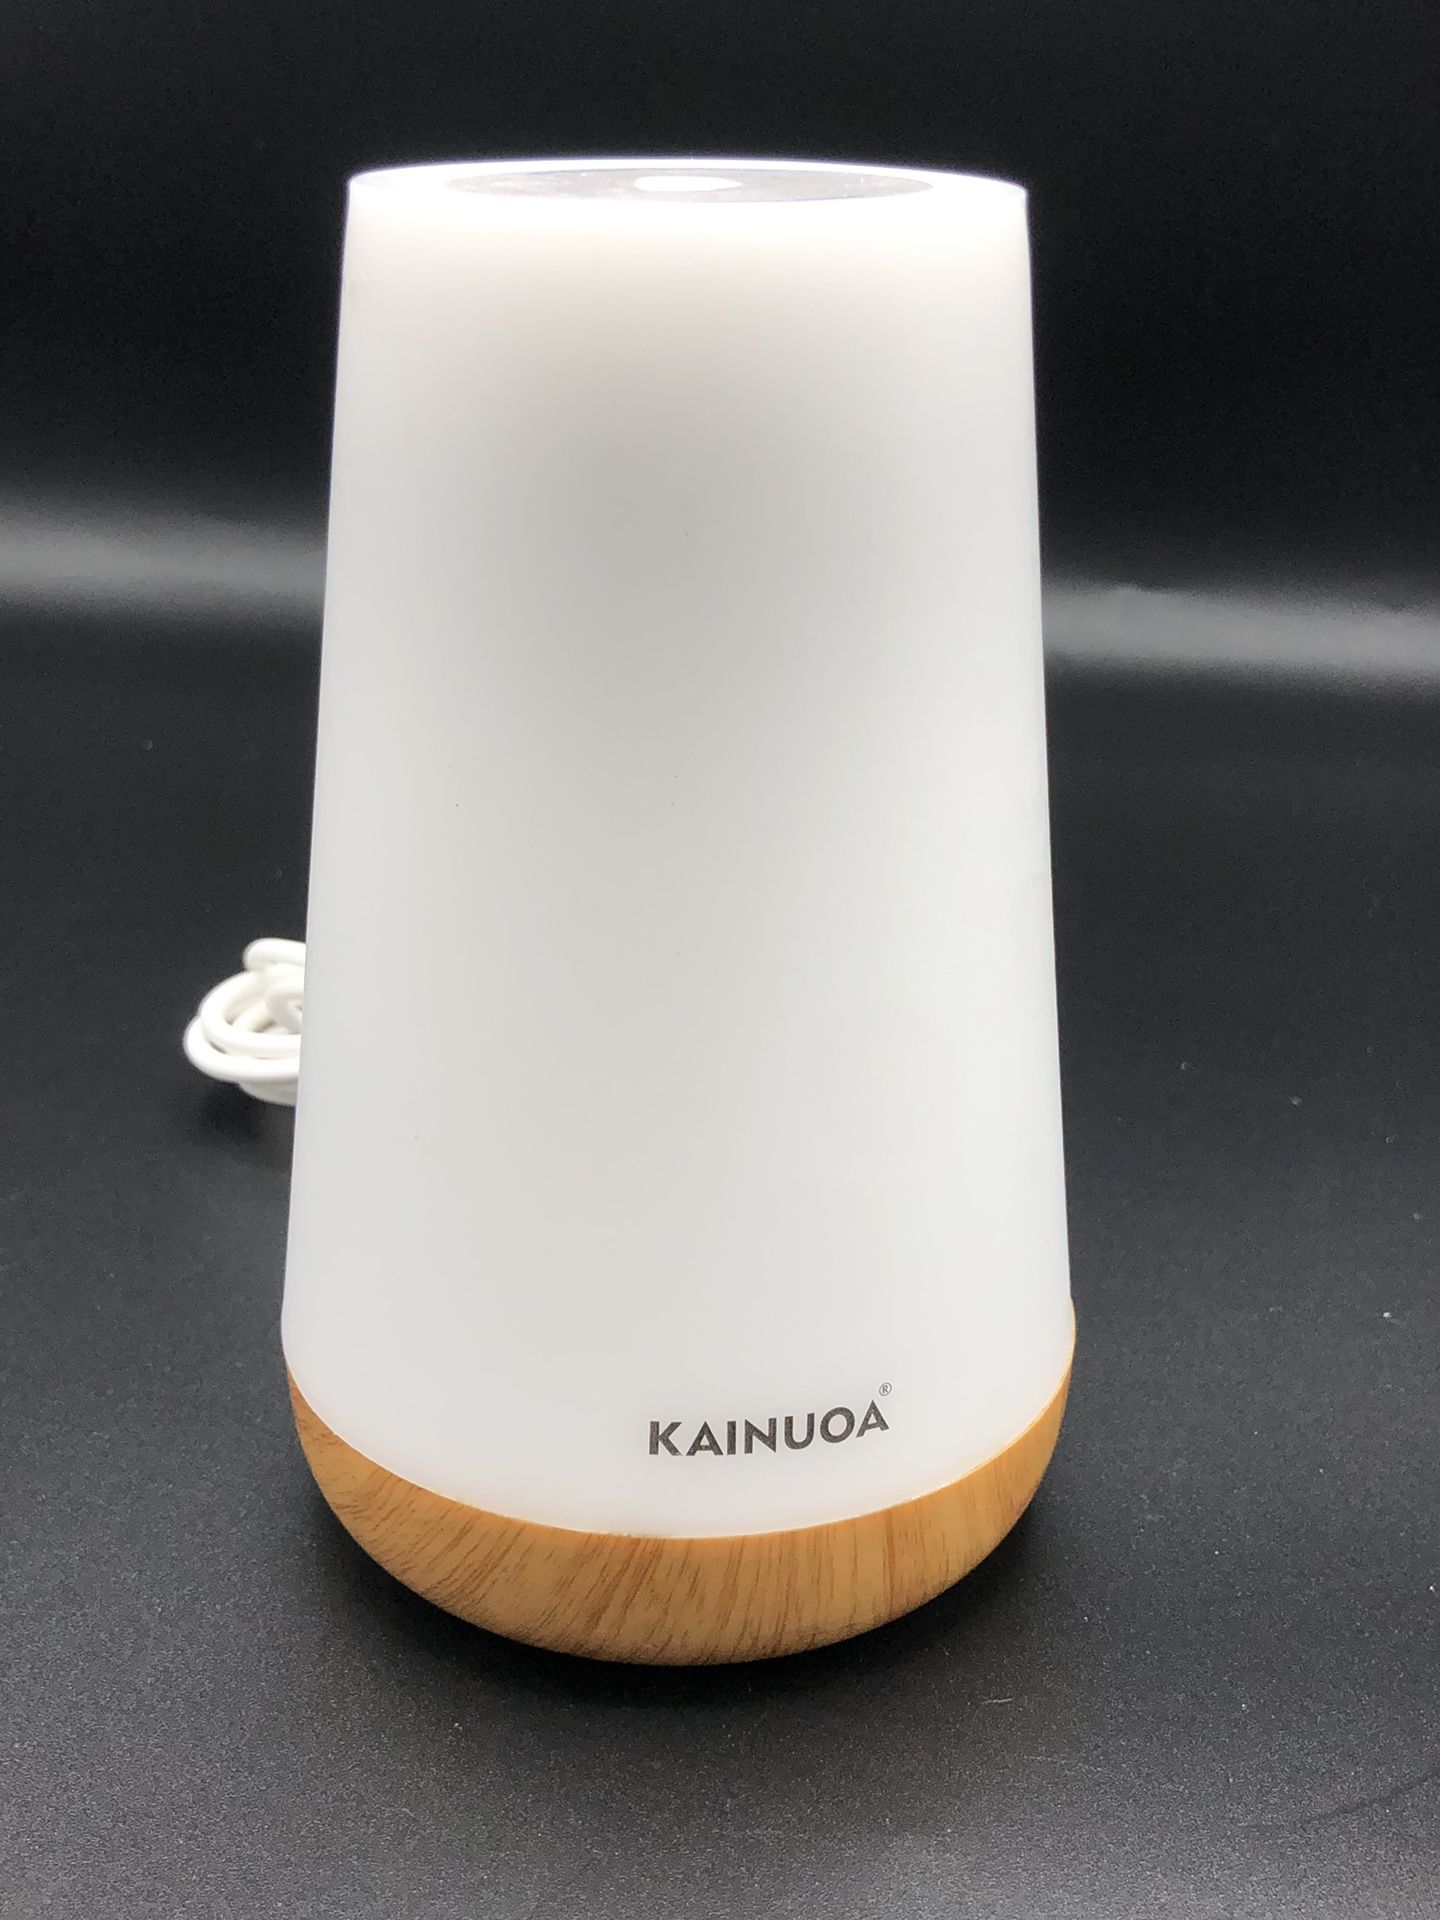 Kainuoa Touch Control Multi-Colored LED Lamp / Bluetooth Speaker Rechargeable